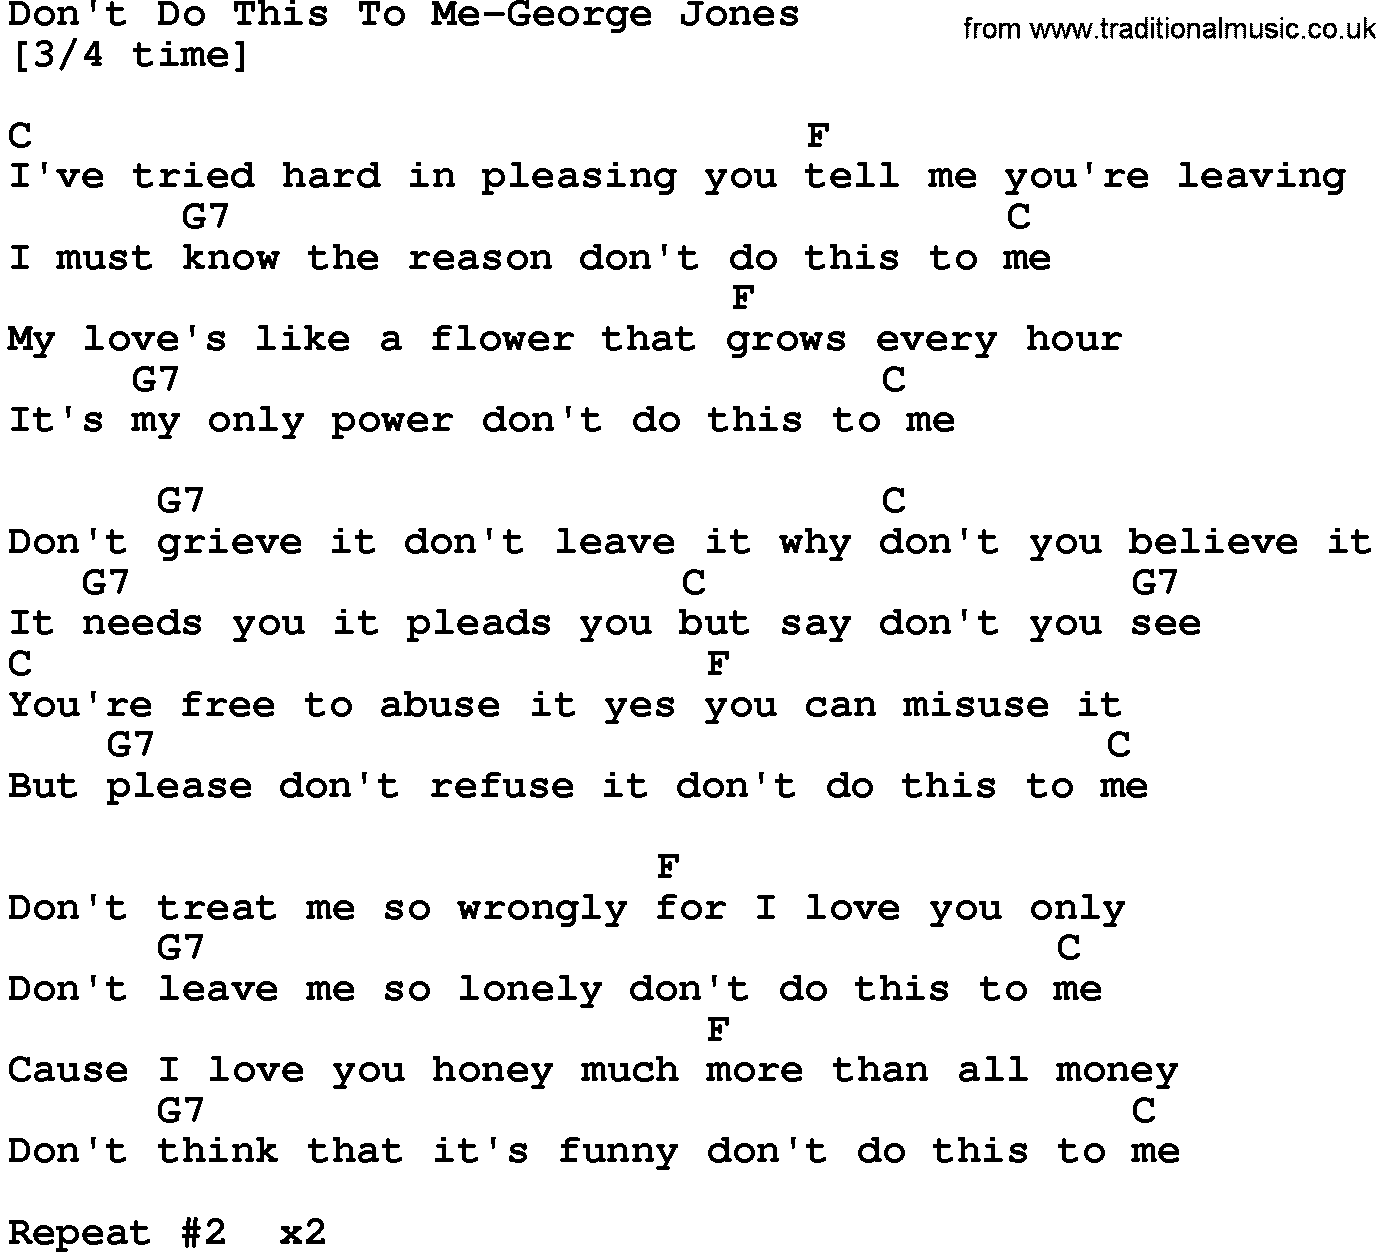 Country music song: Don't Do This To Me-George Jones lyrics and chords